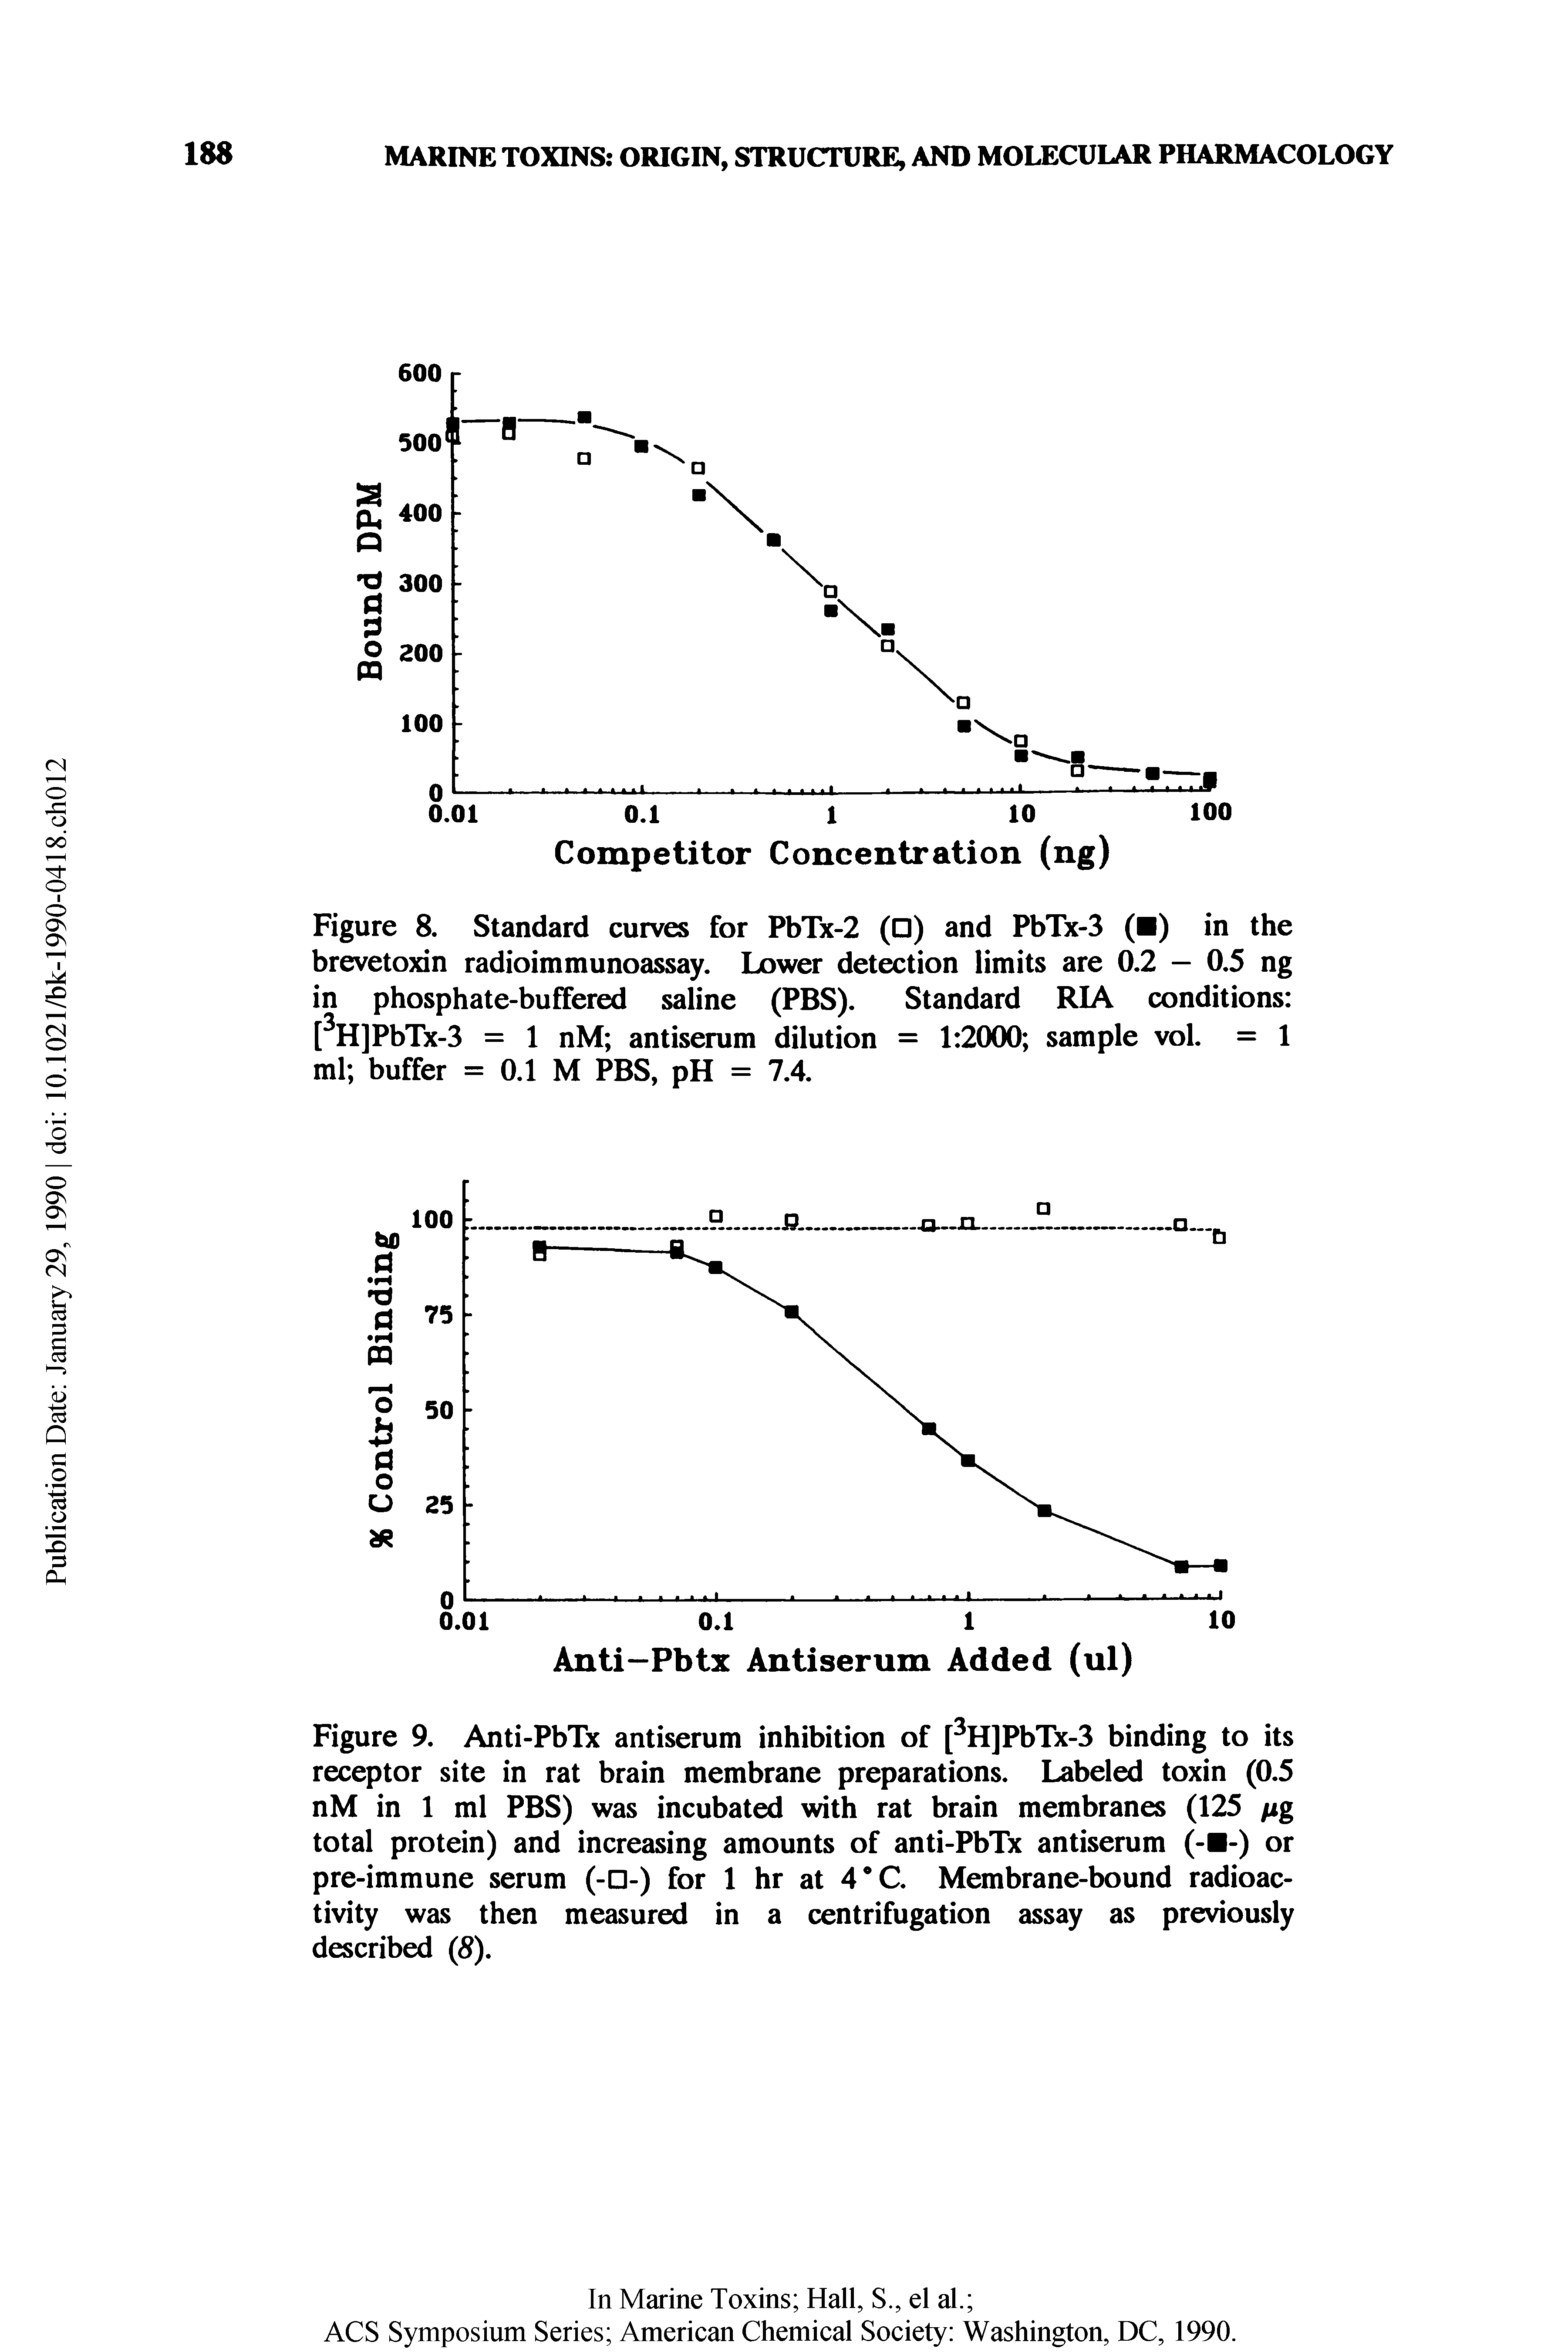 Figure 8. Standard curves for PbTx-2 ( ) and PbTx-3 ( ) in the brevetoxin radioimmunoassay. Lower detection limits are 0.2 — 0.5 ng in phosphate-buffered saline (PBS). Standard RIA conditions [ H]PbTx-3 = 1 nM antiserum dilution = 1 2000 sample vol. = 1 ml buffer = 0.1 M PBS, pH = 7.4.